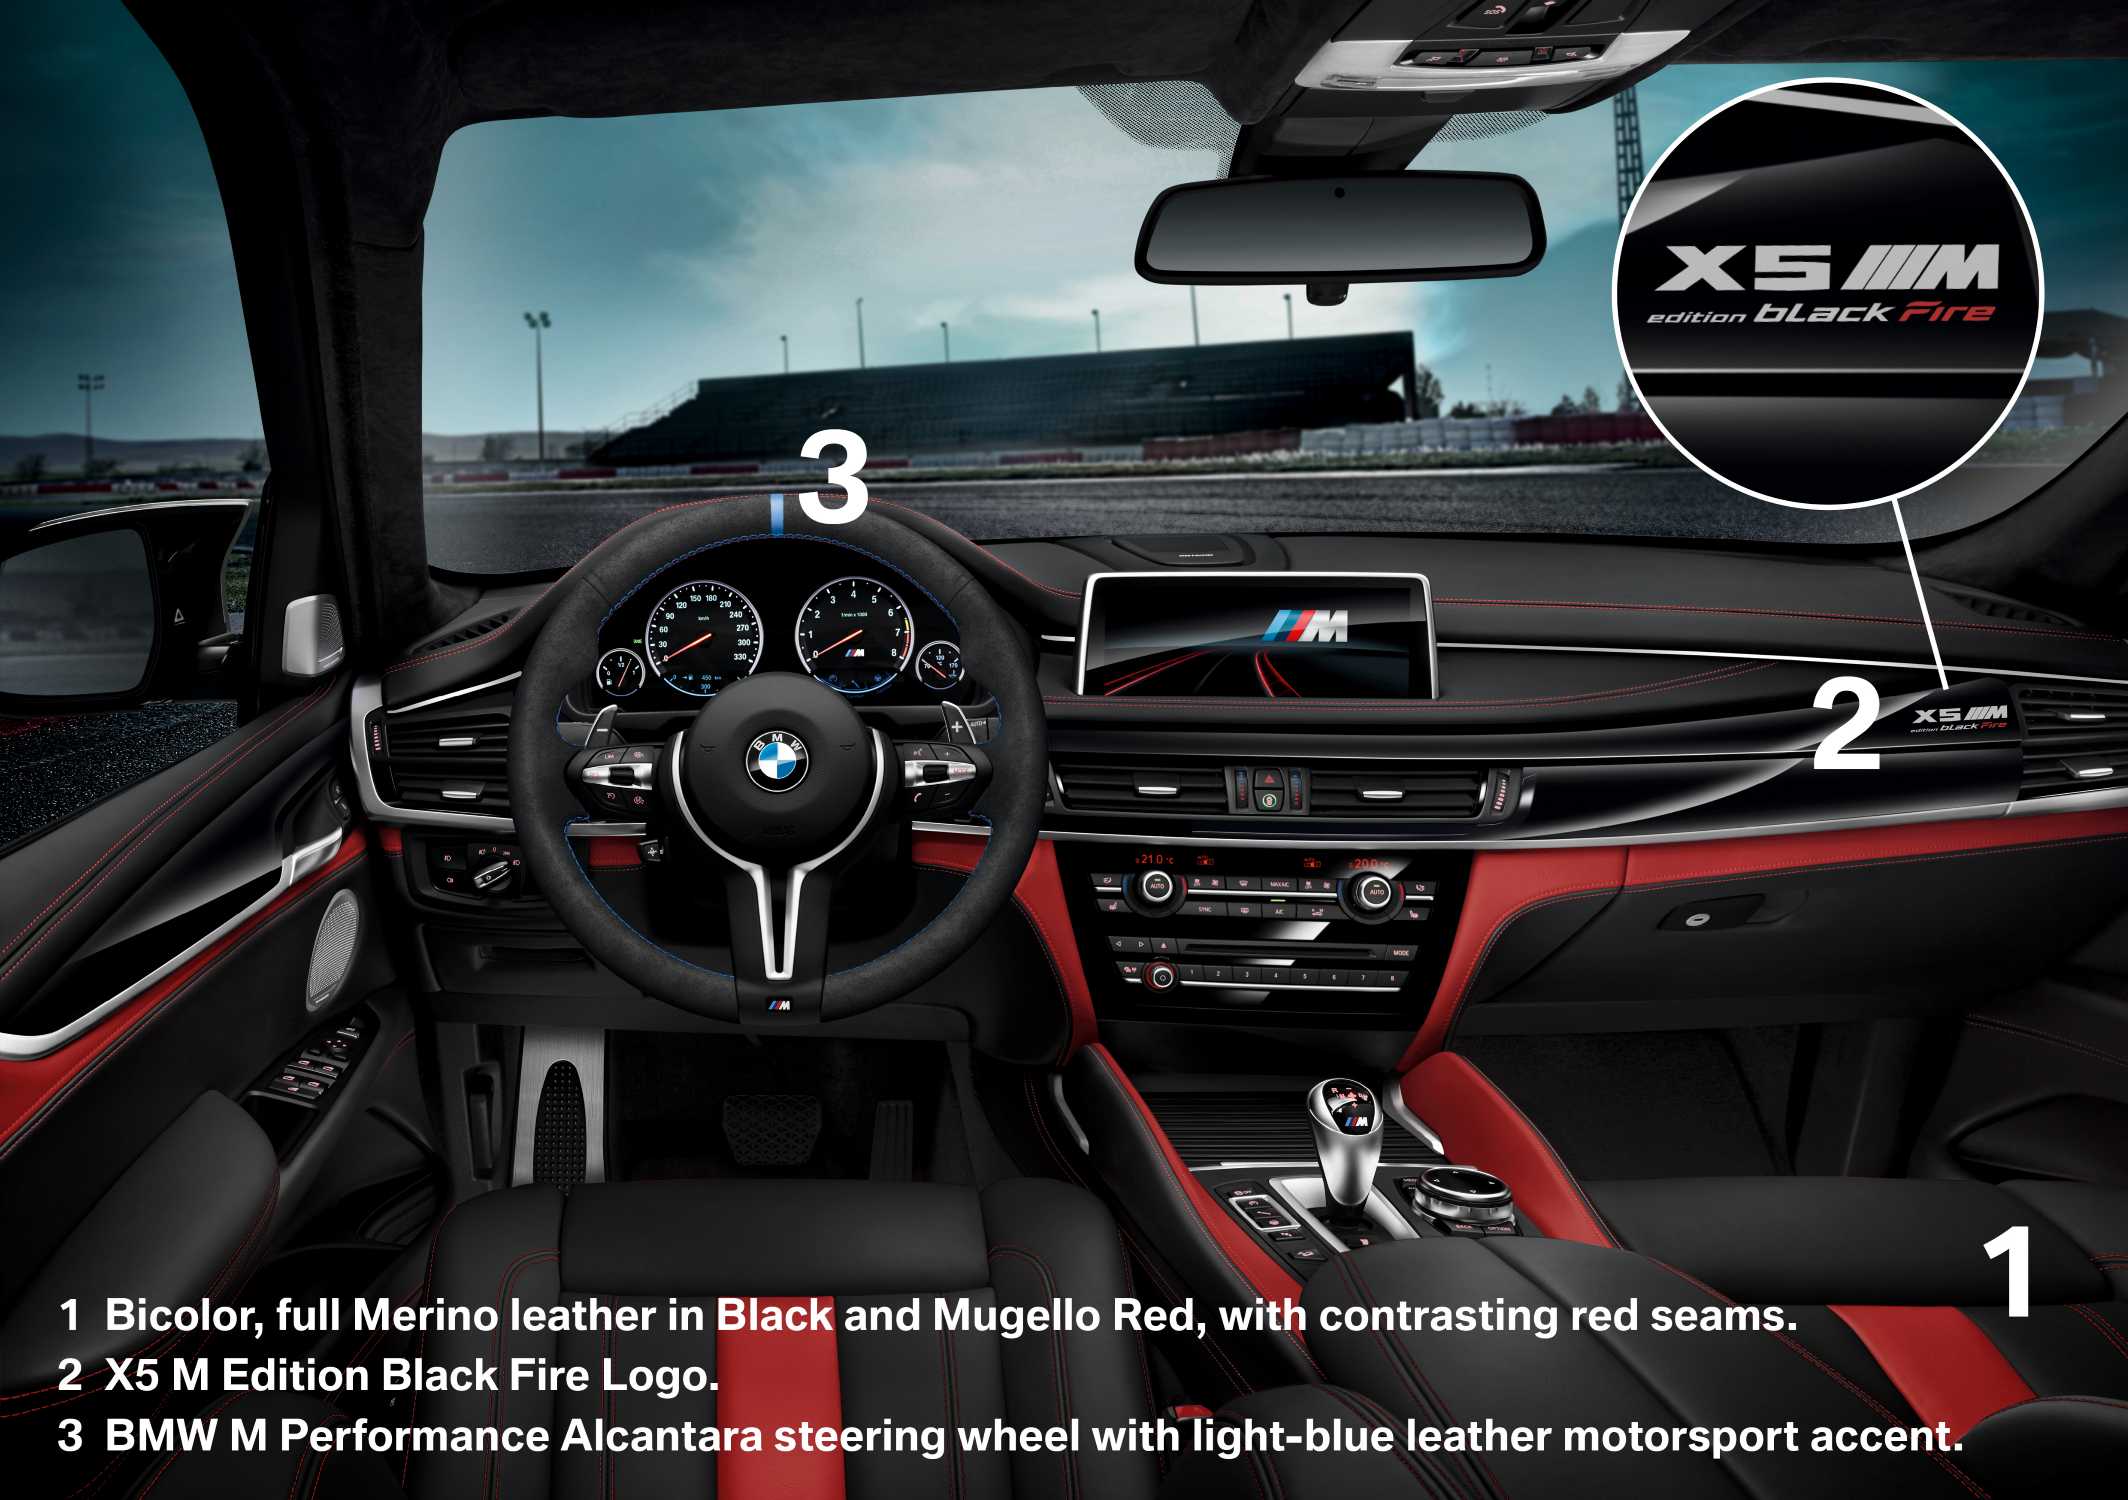 The new BMW X5 M and BMW X6 M Edition Black Fire (06/17).